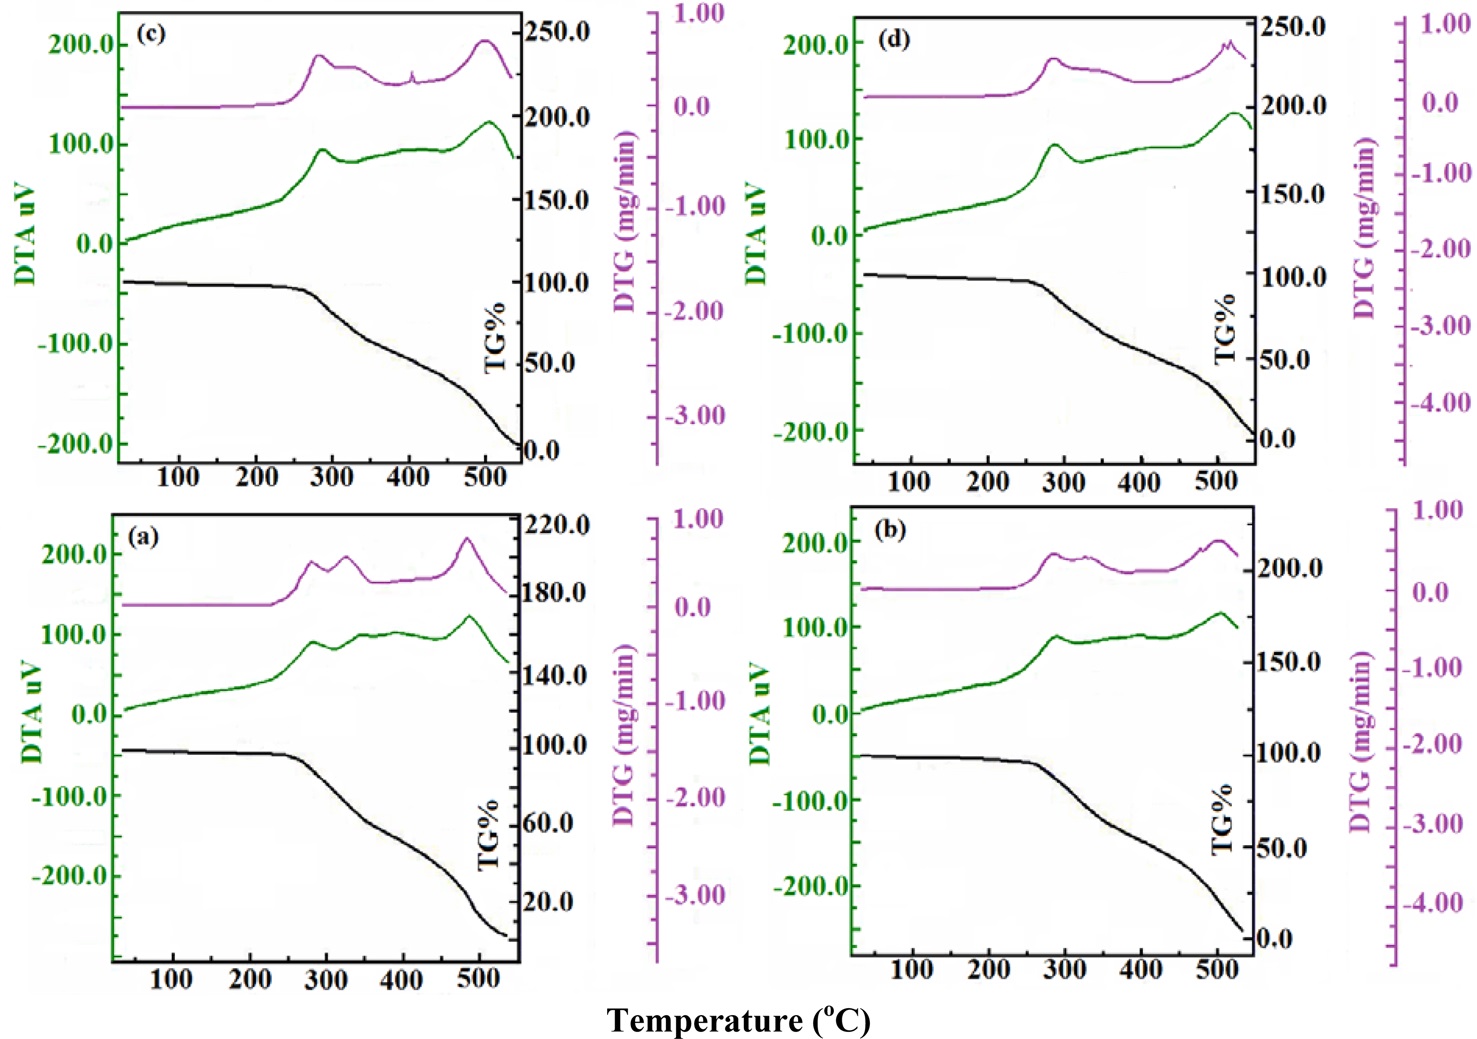 Simultaneous thermogravimetric-differential thermogravimetry-differential thermal analysis (TG-DTG-DTA) scans of cured epoxy (a) and multi-walled carbon
nanotube (MWCNT)/epoxy composites synthesized at MWCNT concentration (phr) of 0.1 (b), 0.2 (c) and 0.3 (d) in supercritical carbon dioxide.